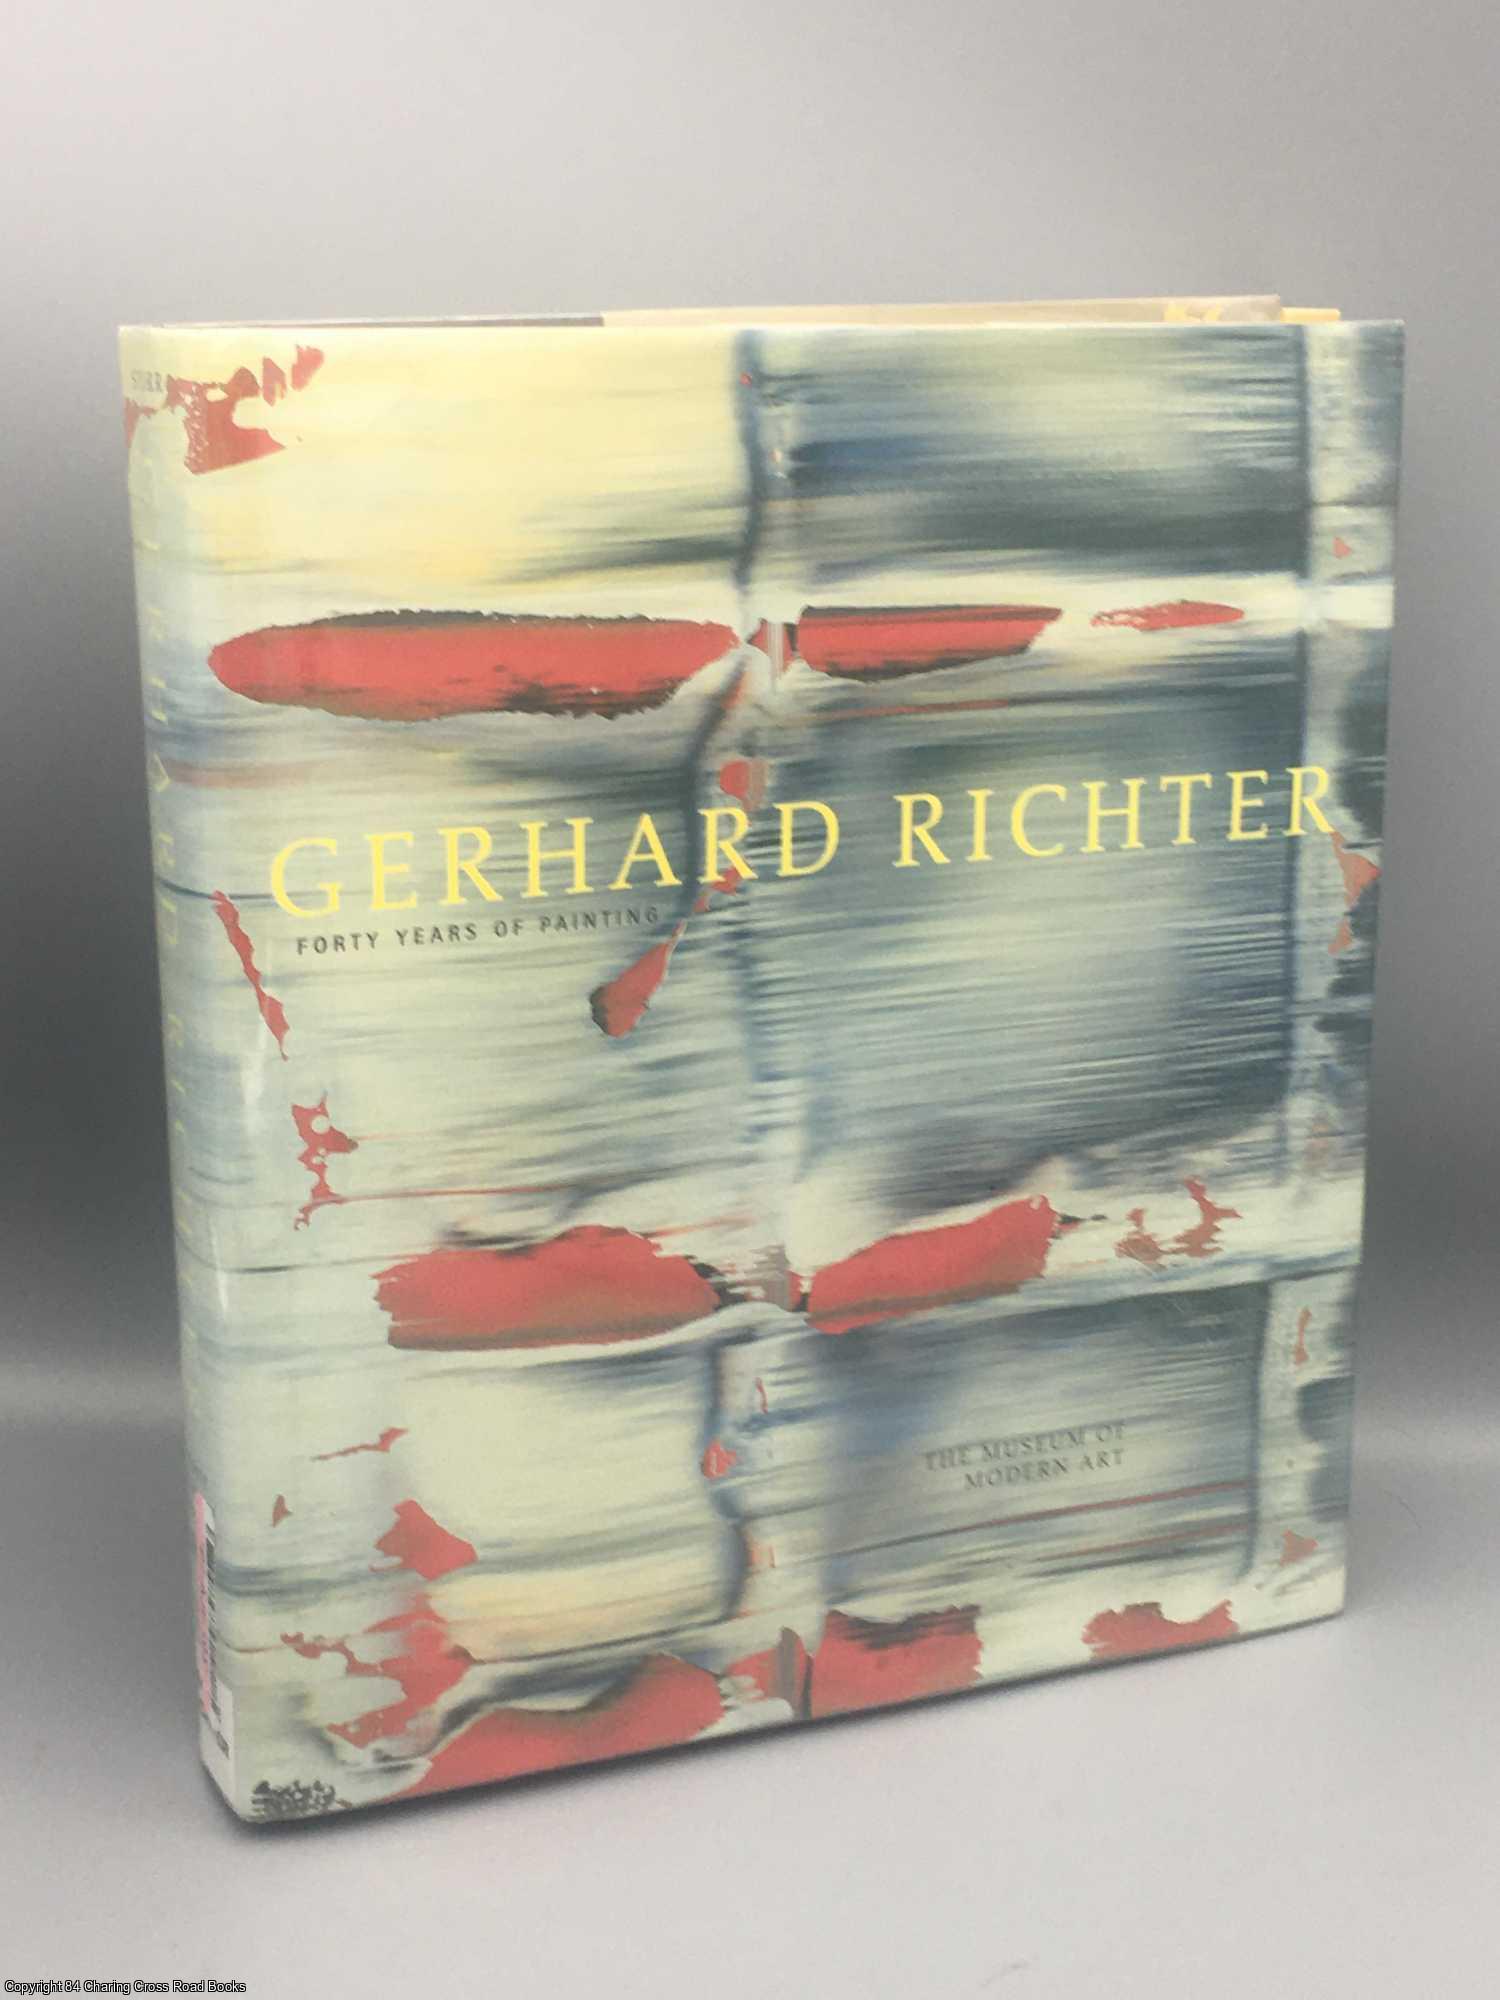 Storr, Robert - Gerhard Richter: forty years of painting